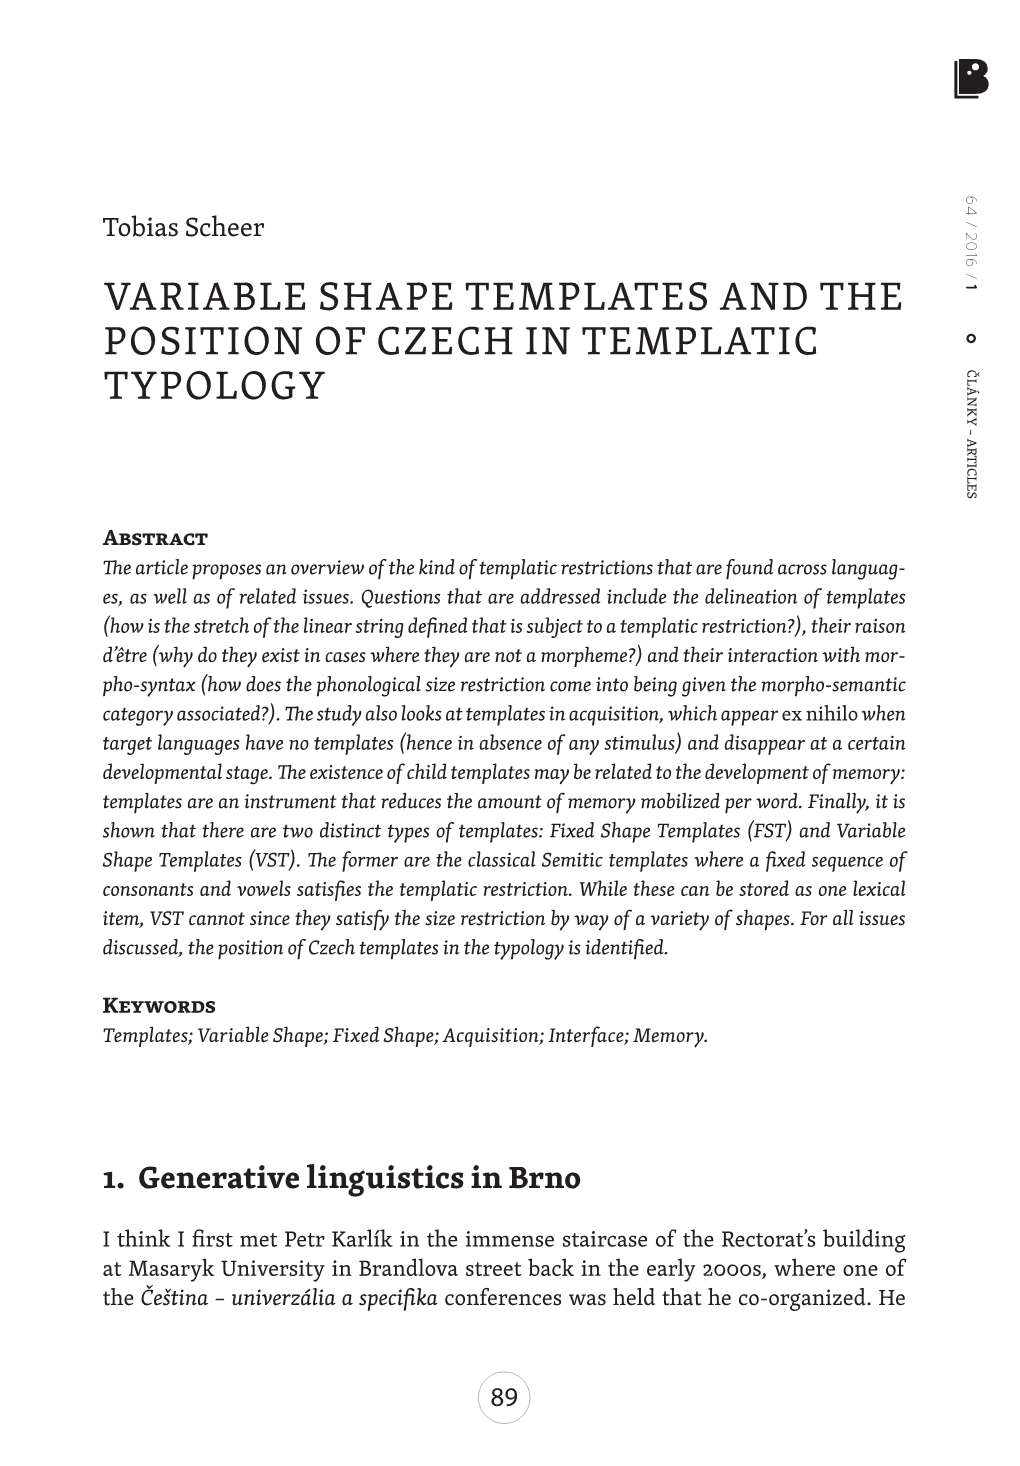 Variable Shape Templates and the Position of Czech in Templatic Typology